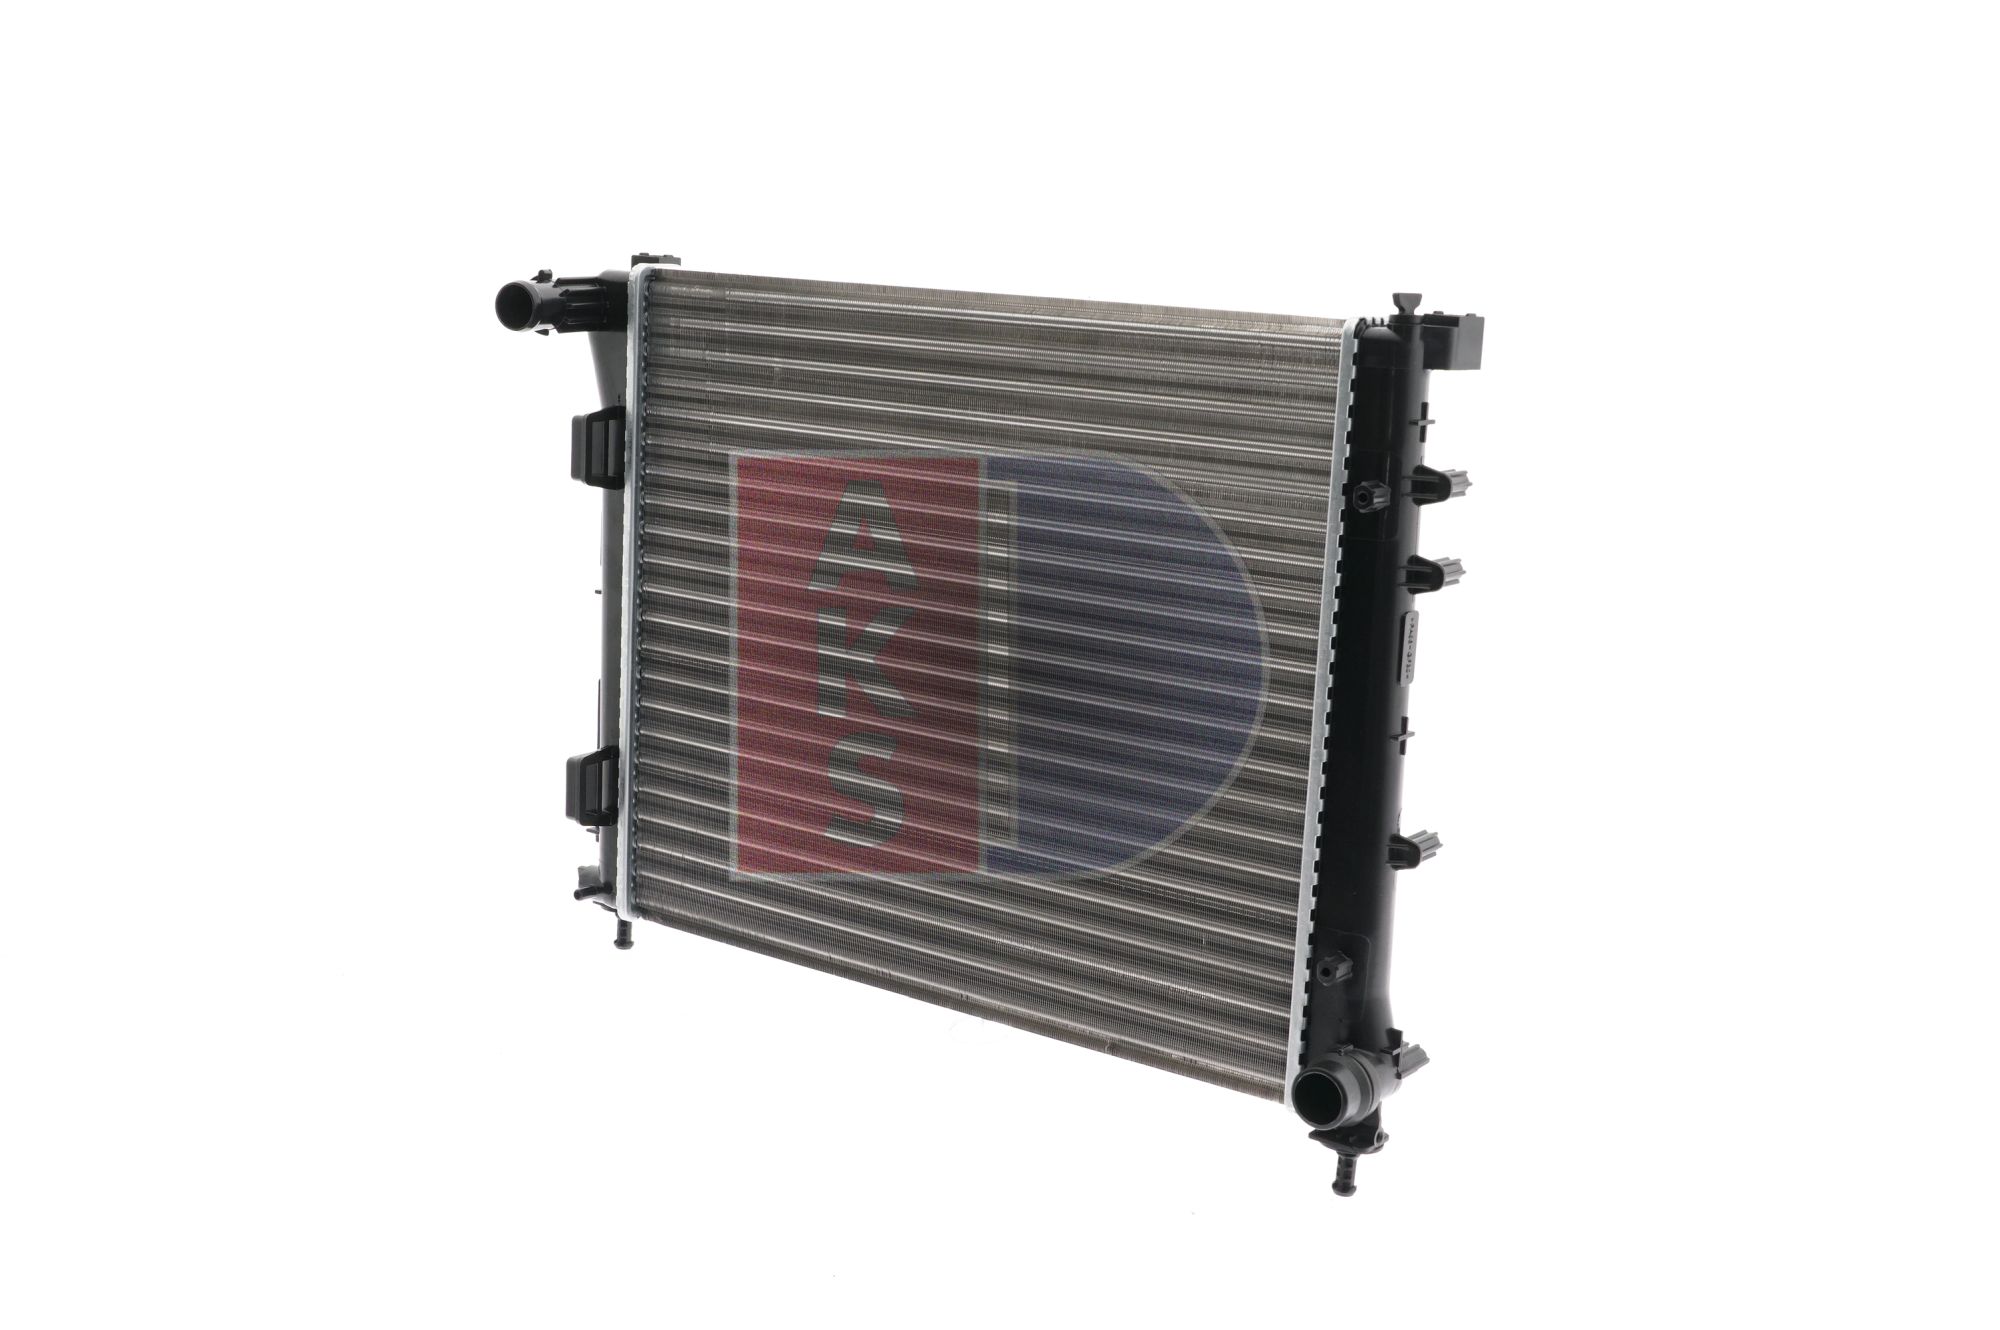 AKS DASIS 080001N Engine radiator Aluminium, for vehicles with/without air conditioning, 480 x 395 x 27 mm, Mechanically jointed cooling fins